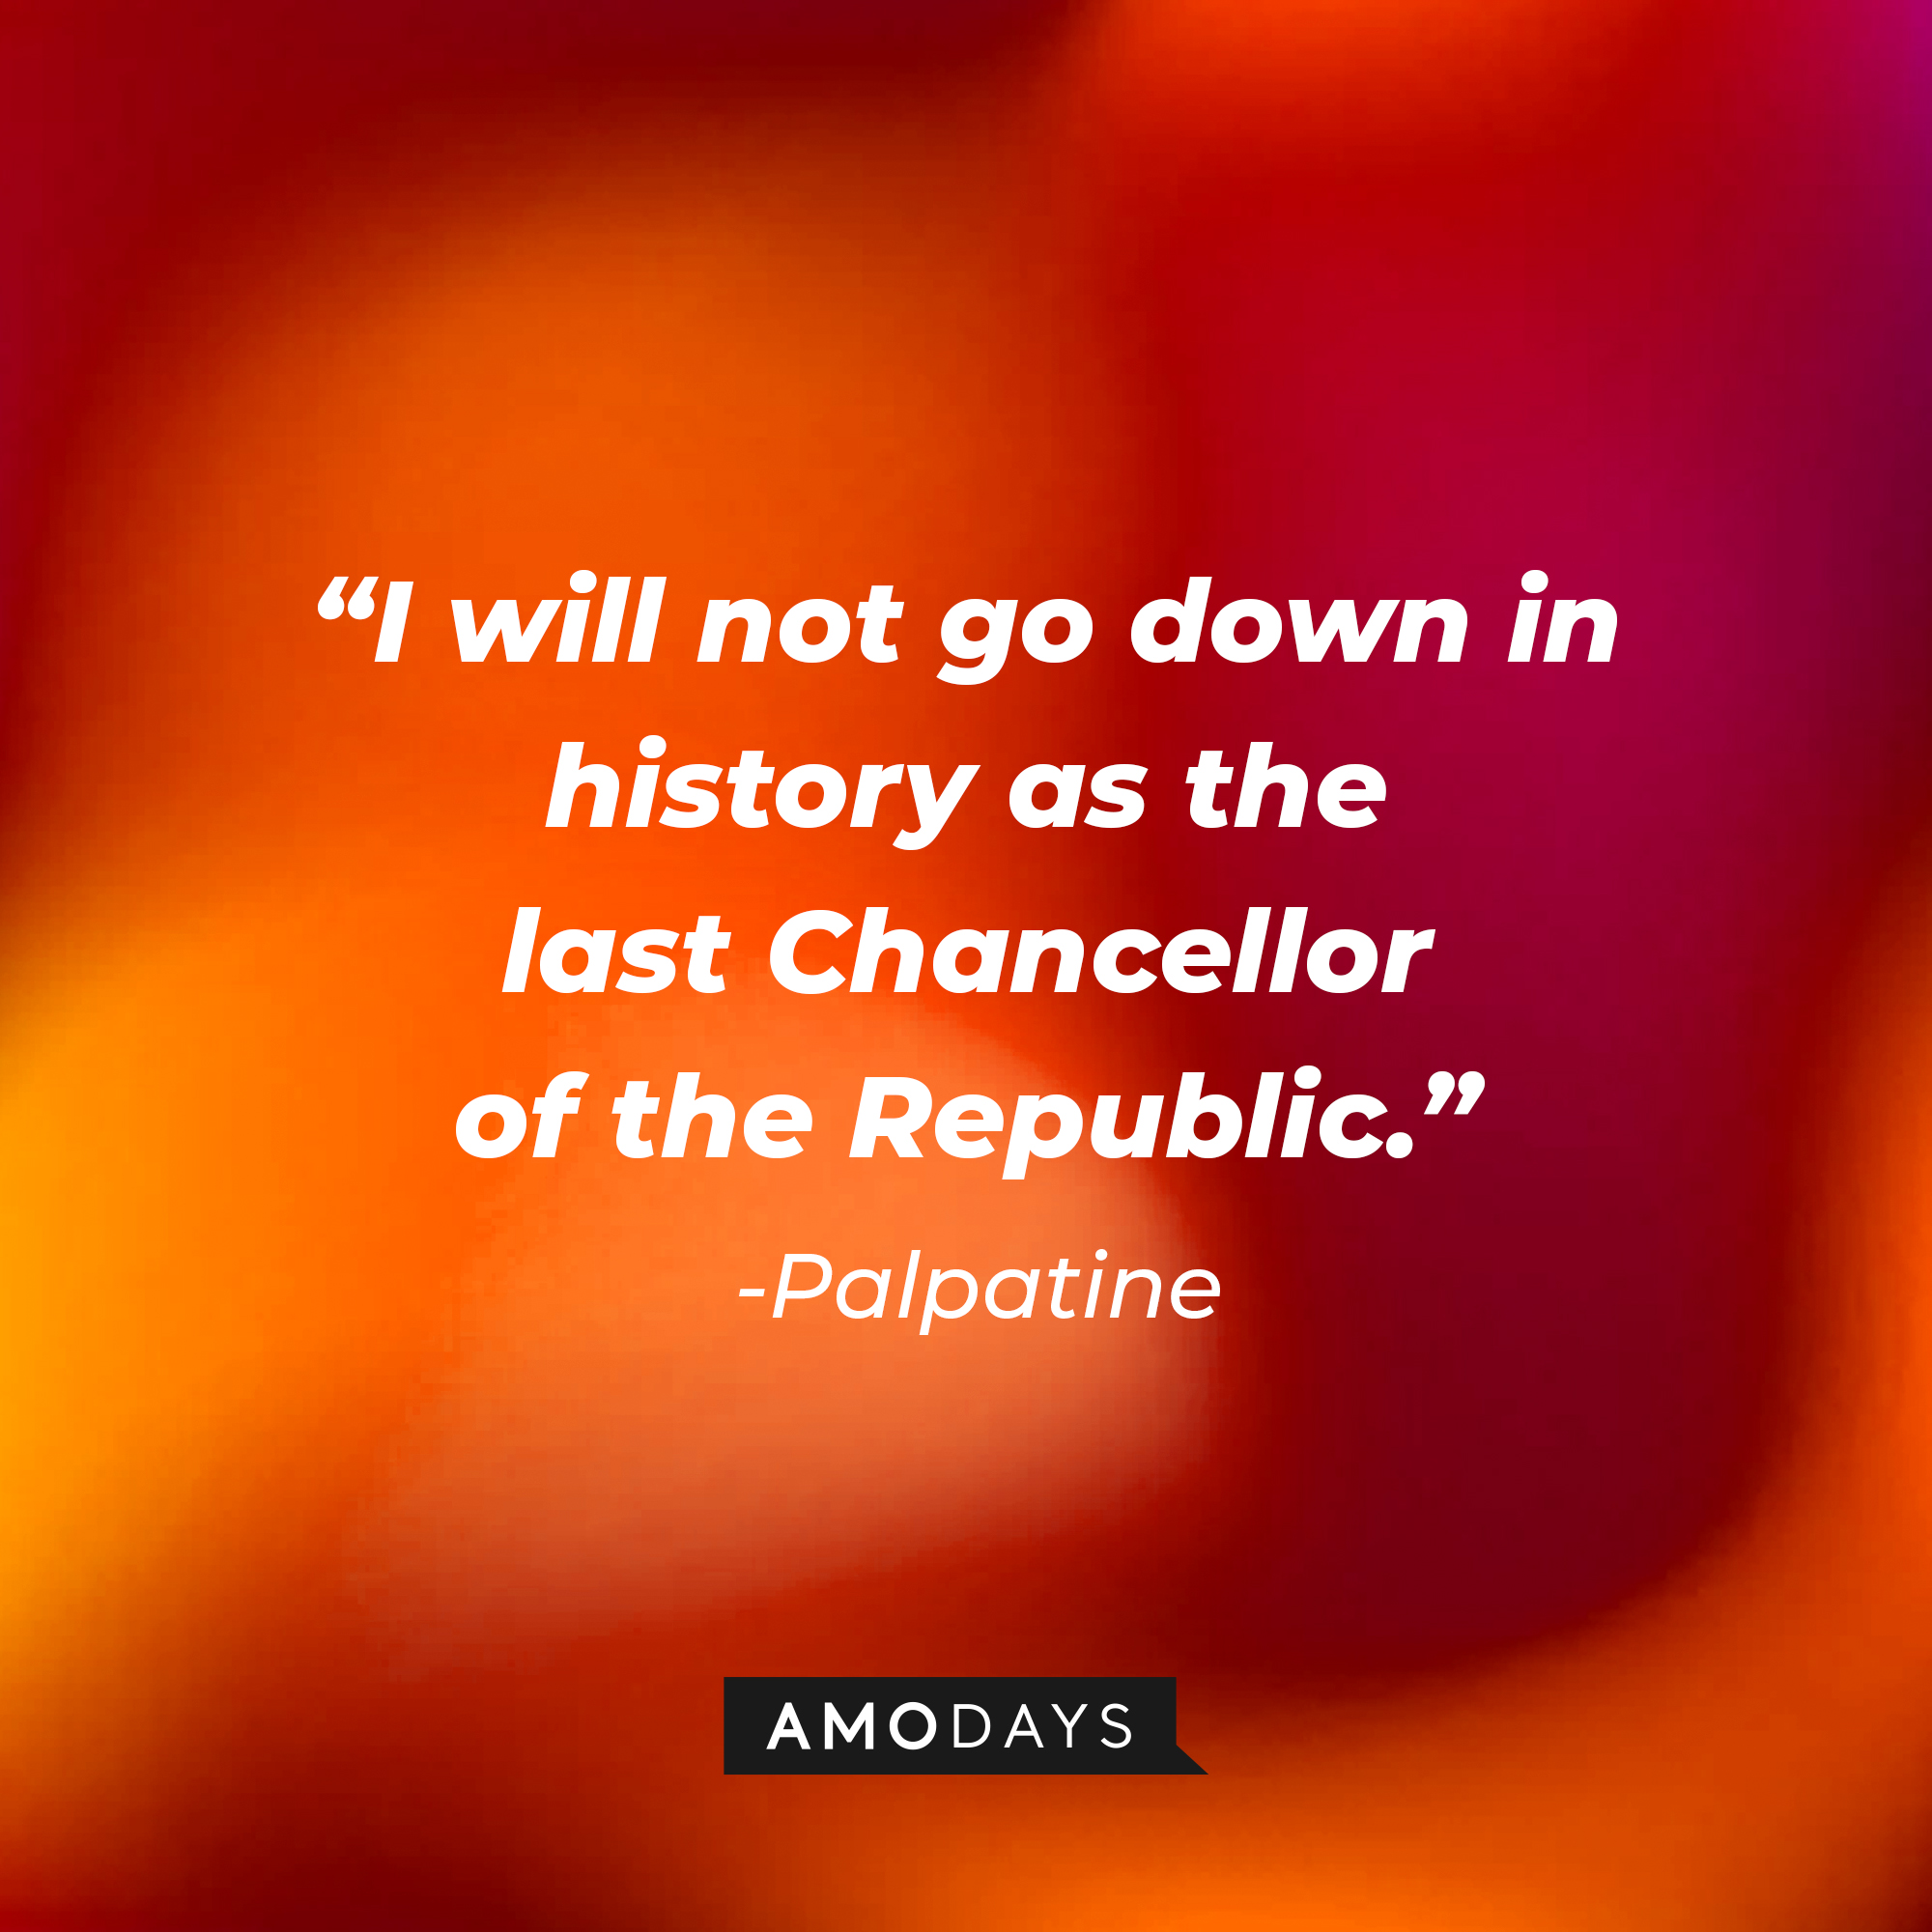 Palpatine’s quote: “I will not go down in history as the last Chancellor of the Republic.” | Source: AmoDays